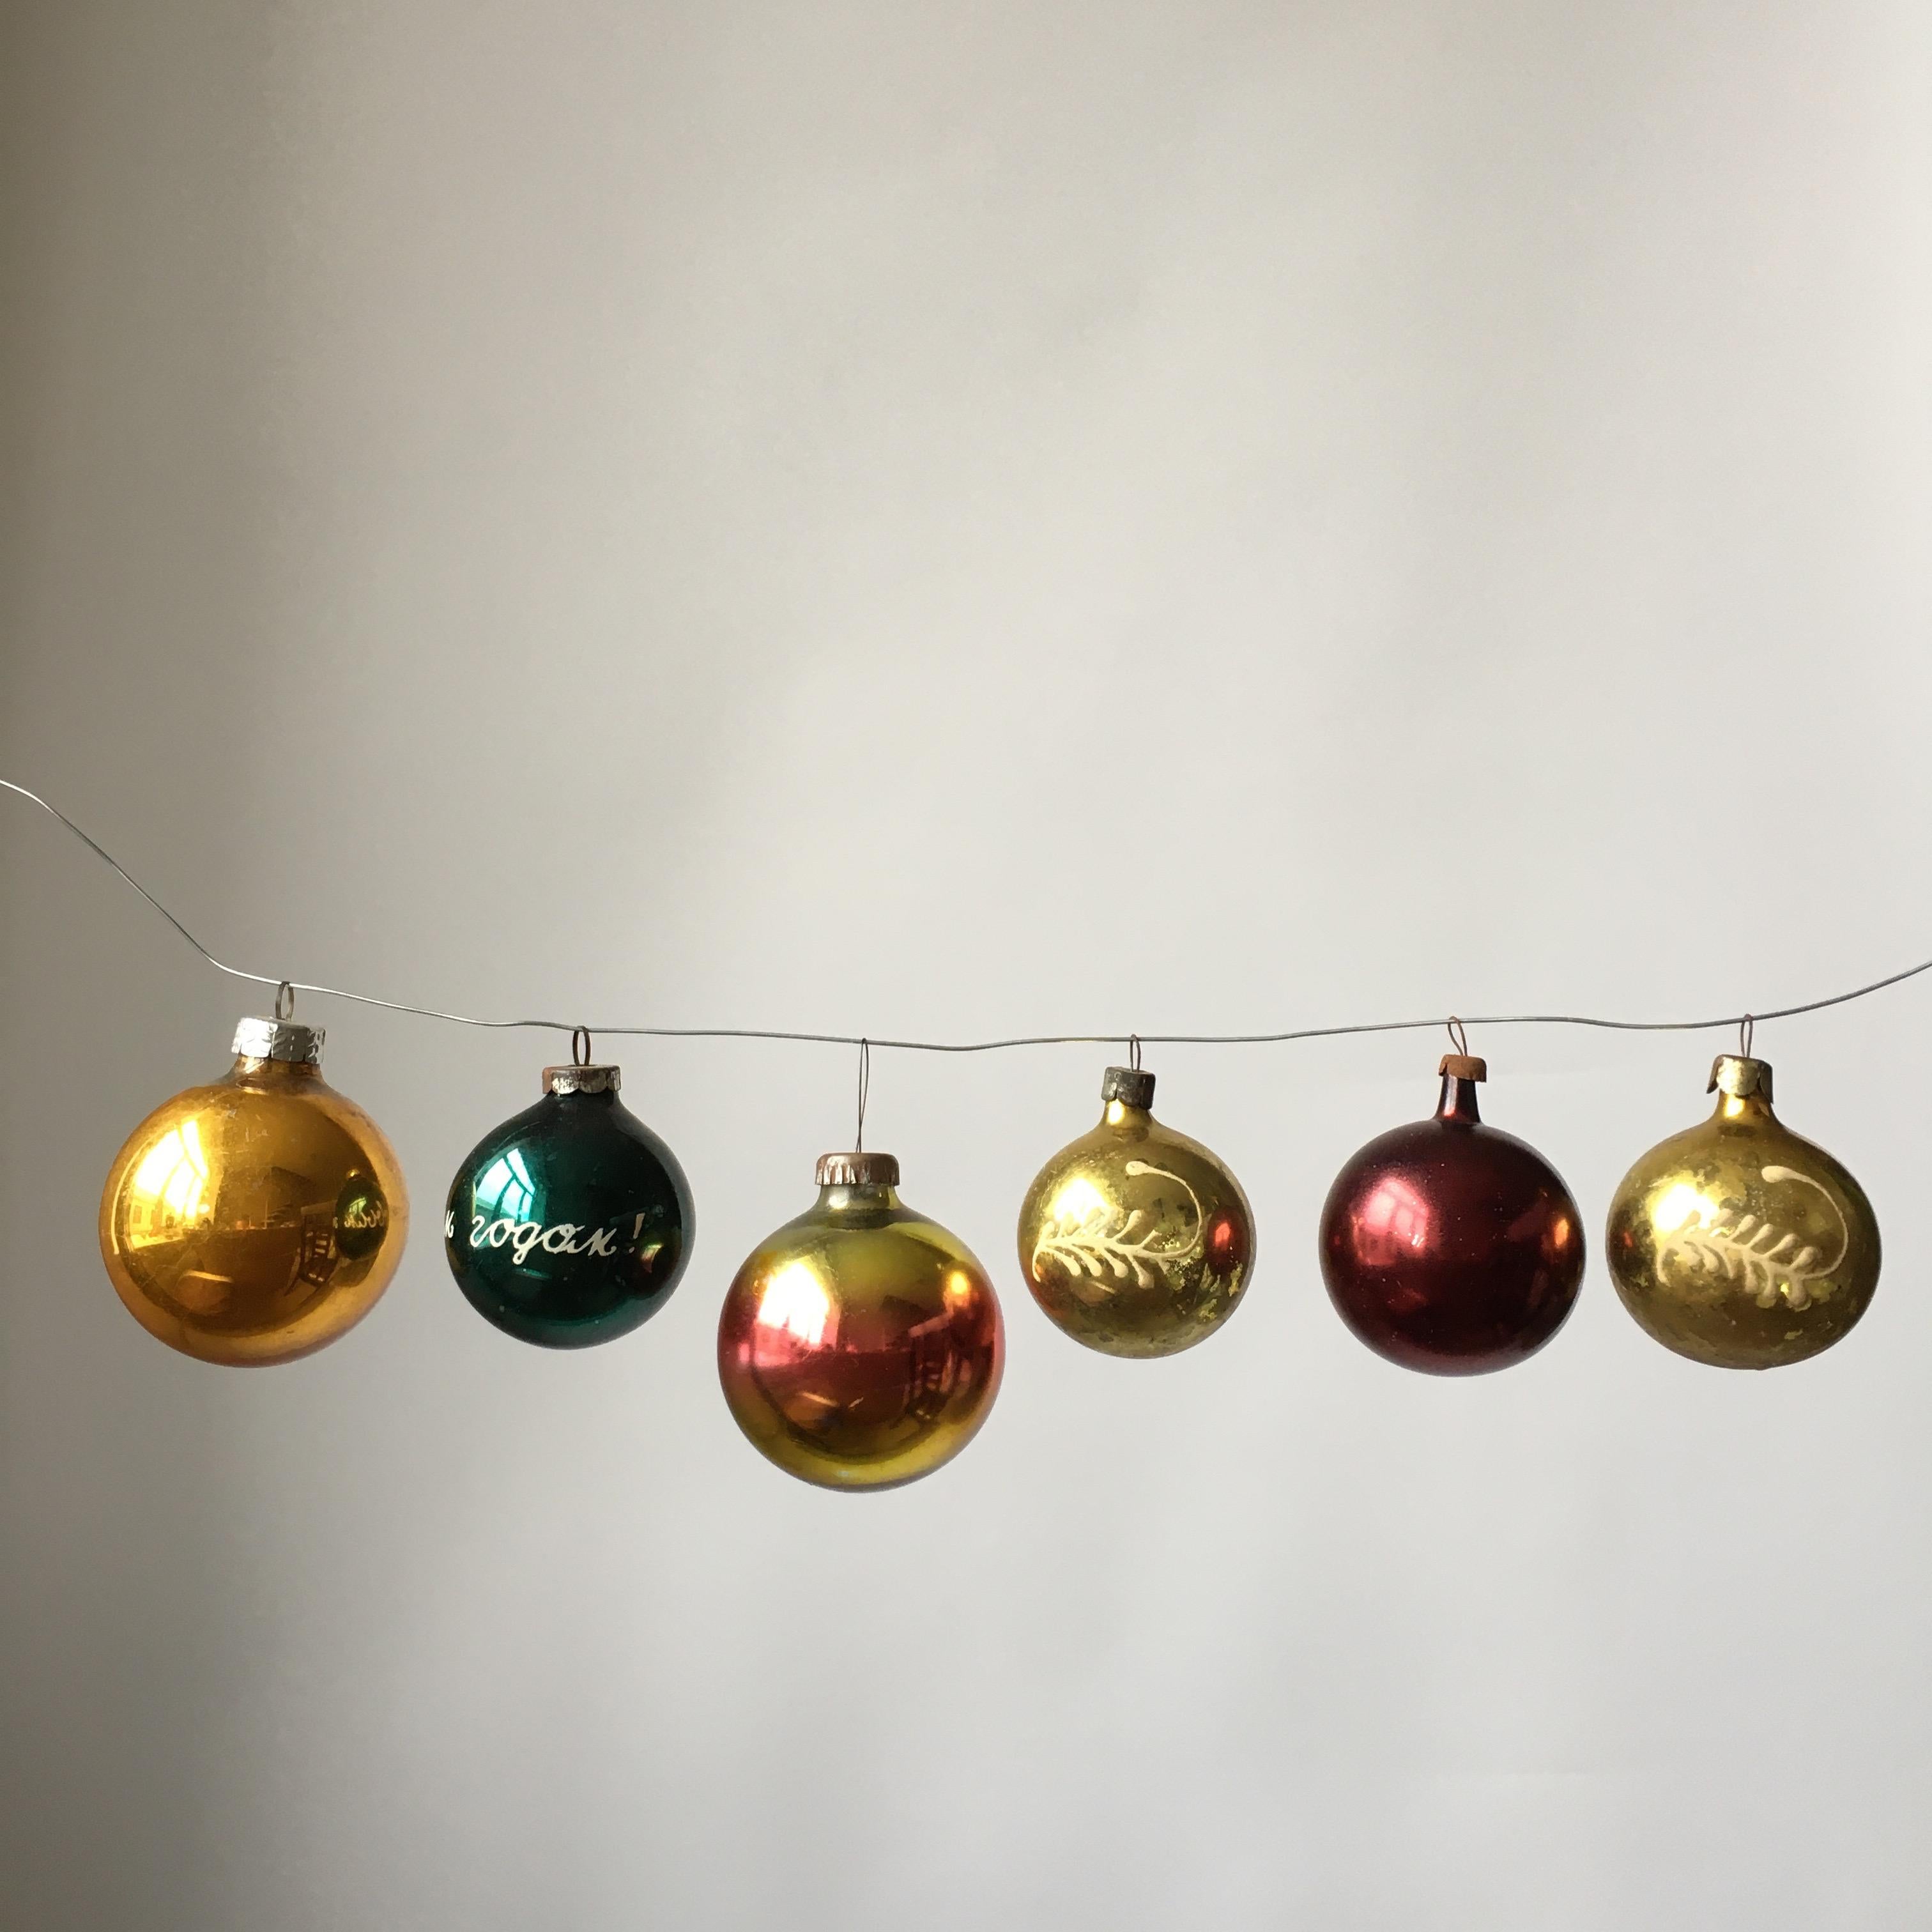 European Midcentury Christmas Ornaments, Set of 4 For Sale